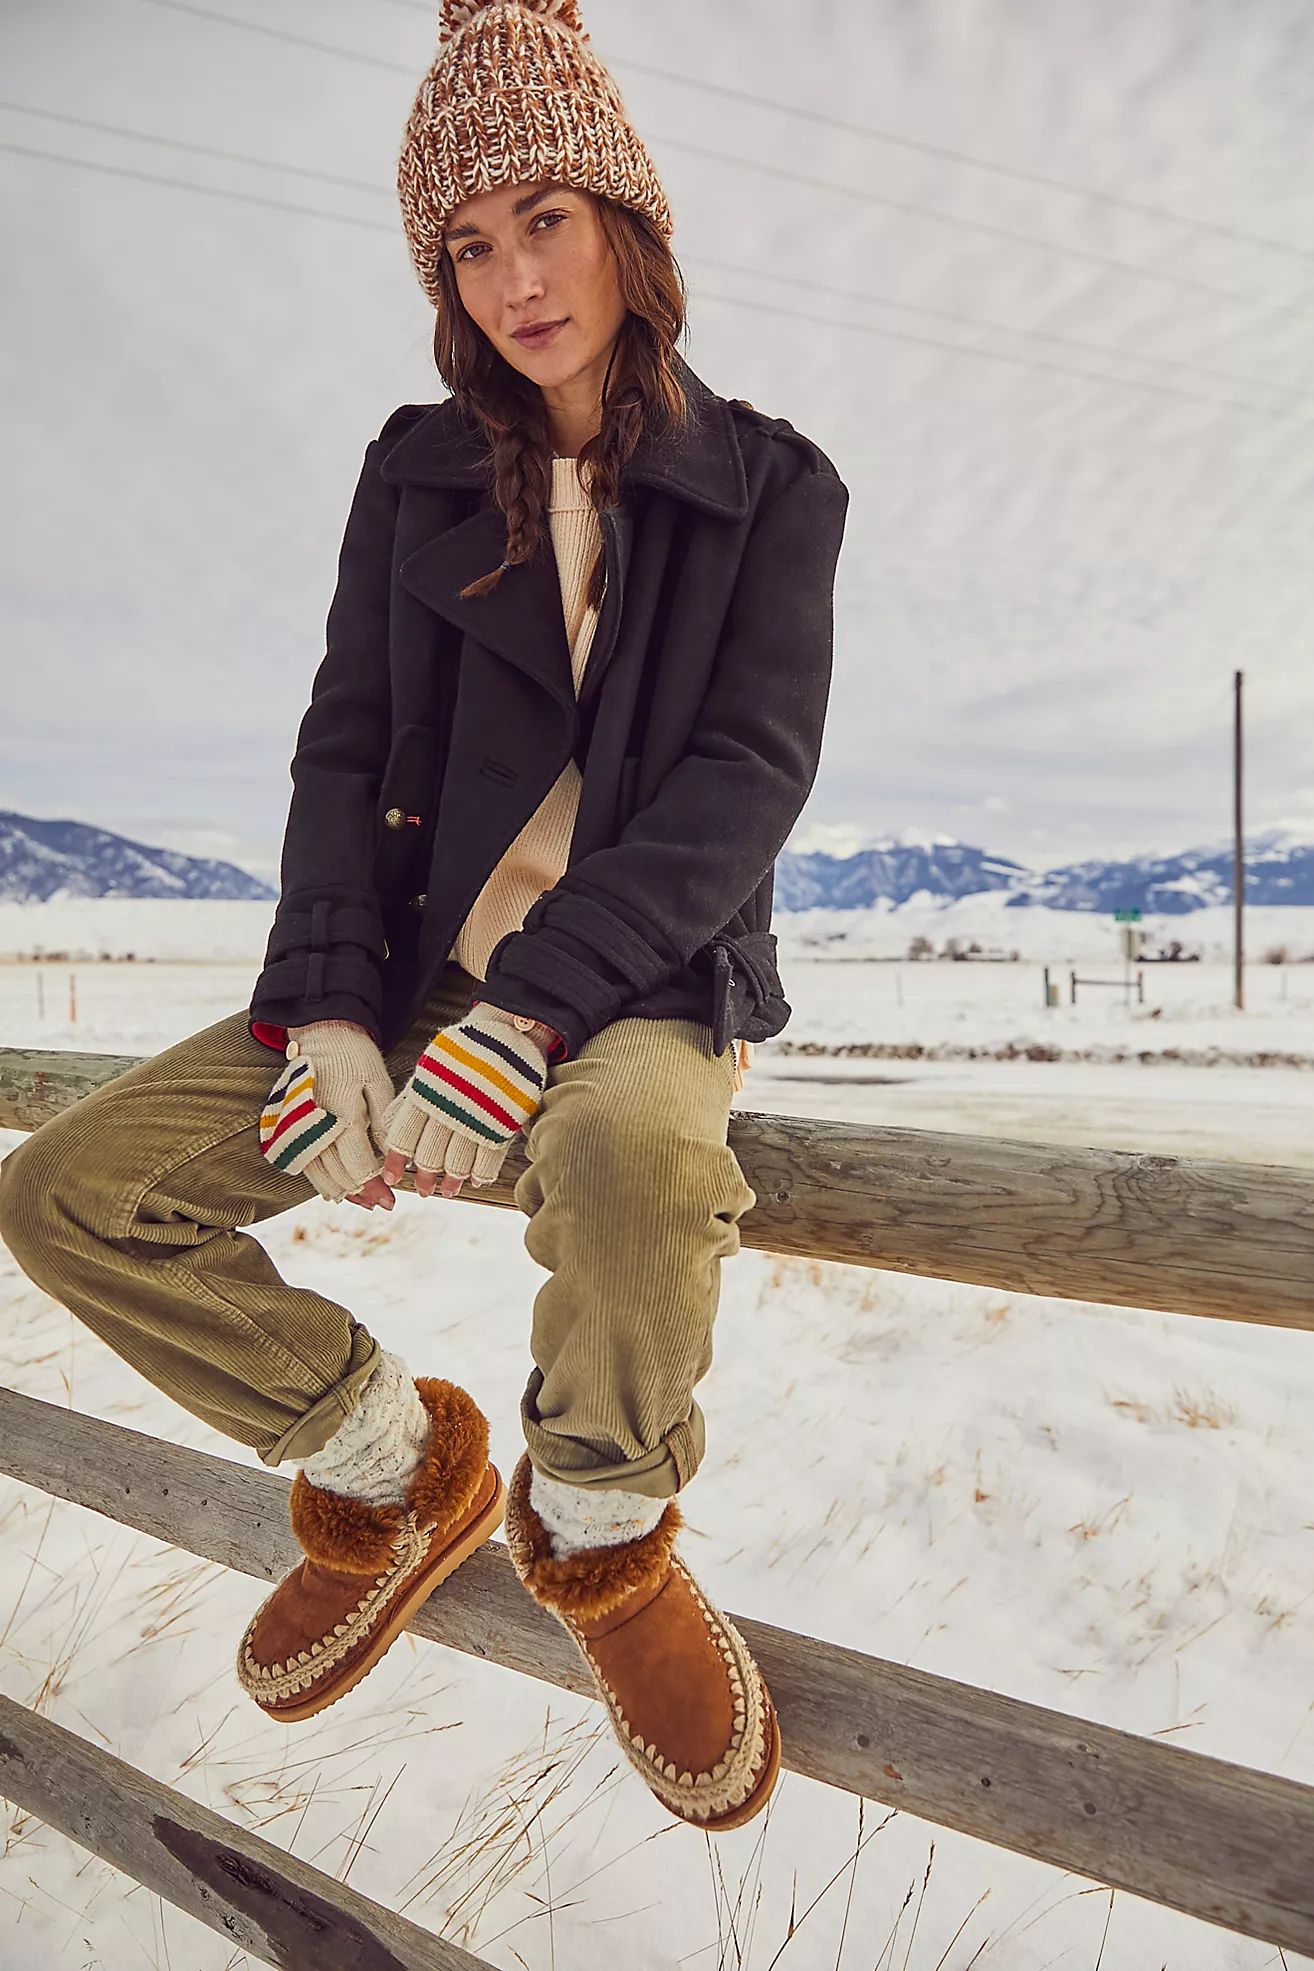 MOU Glacier Boots | Free People (Global - UK&FR Excluded)